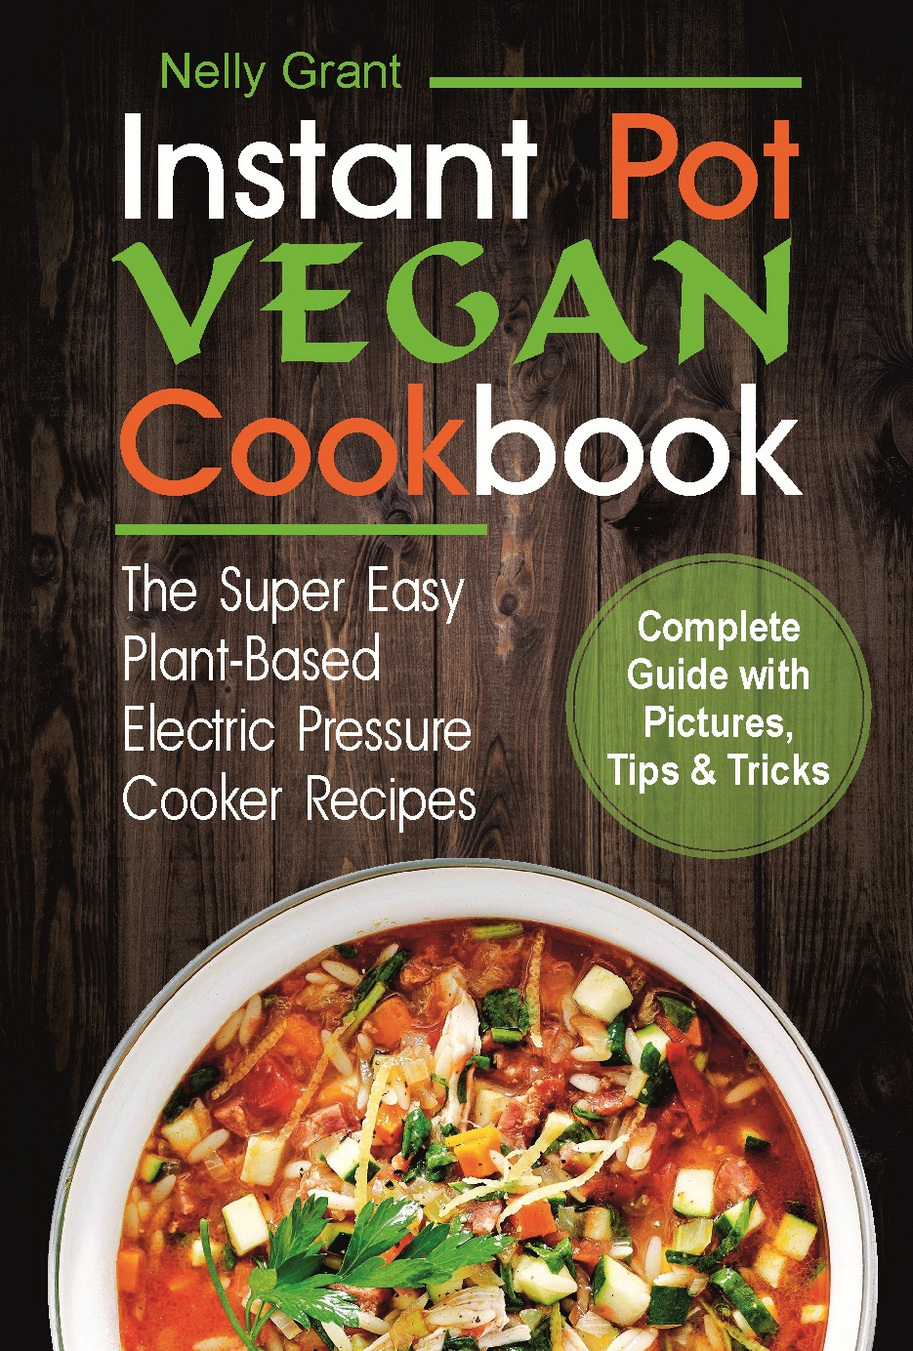 FREE: Instant Pot Vegan Cookbook: The Super Easy Plant-Based Electric Pressure Cooker Recipes by Nelly Grant